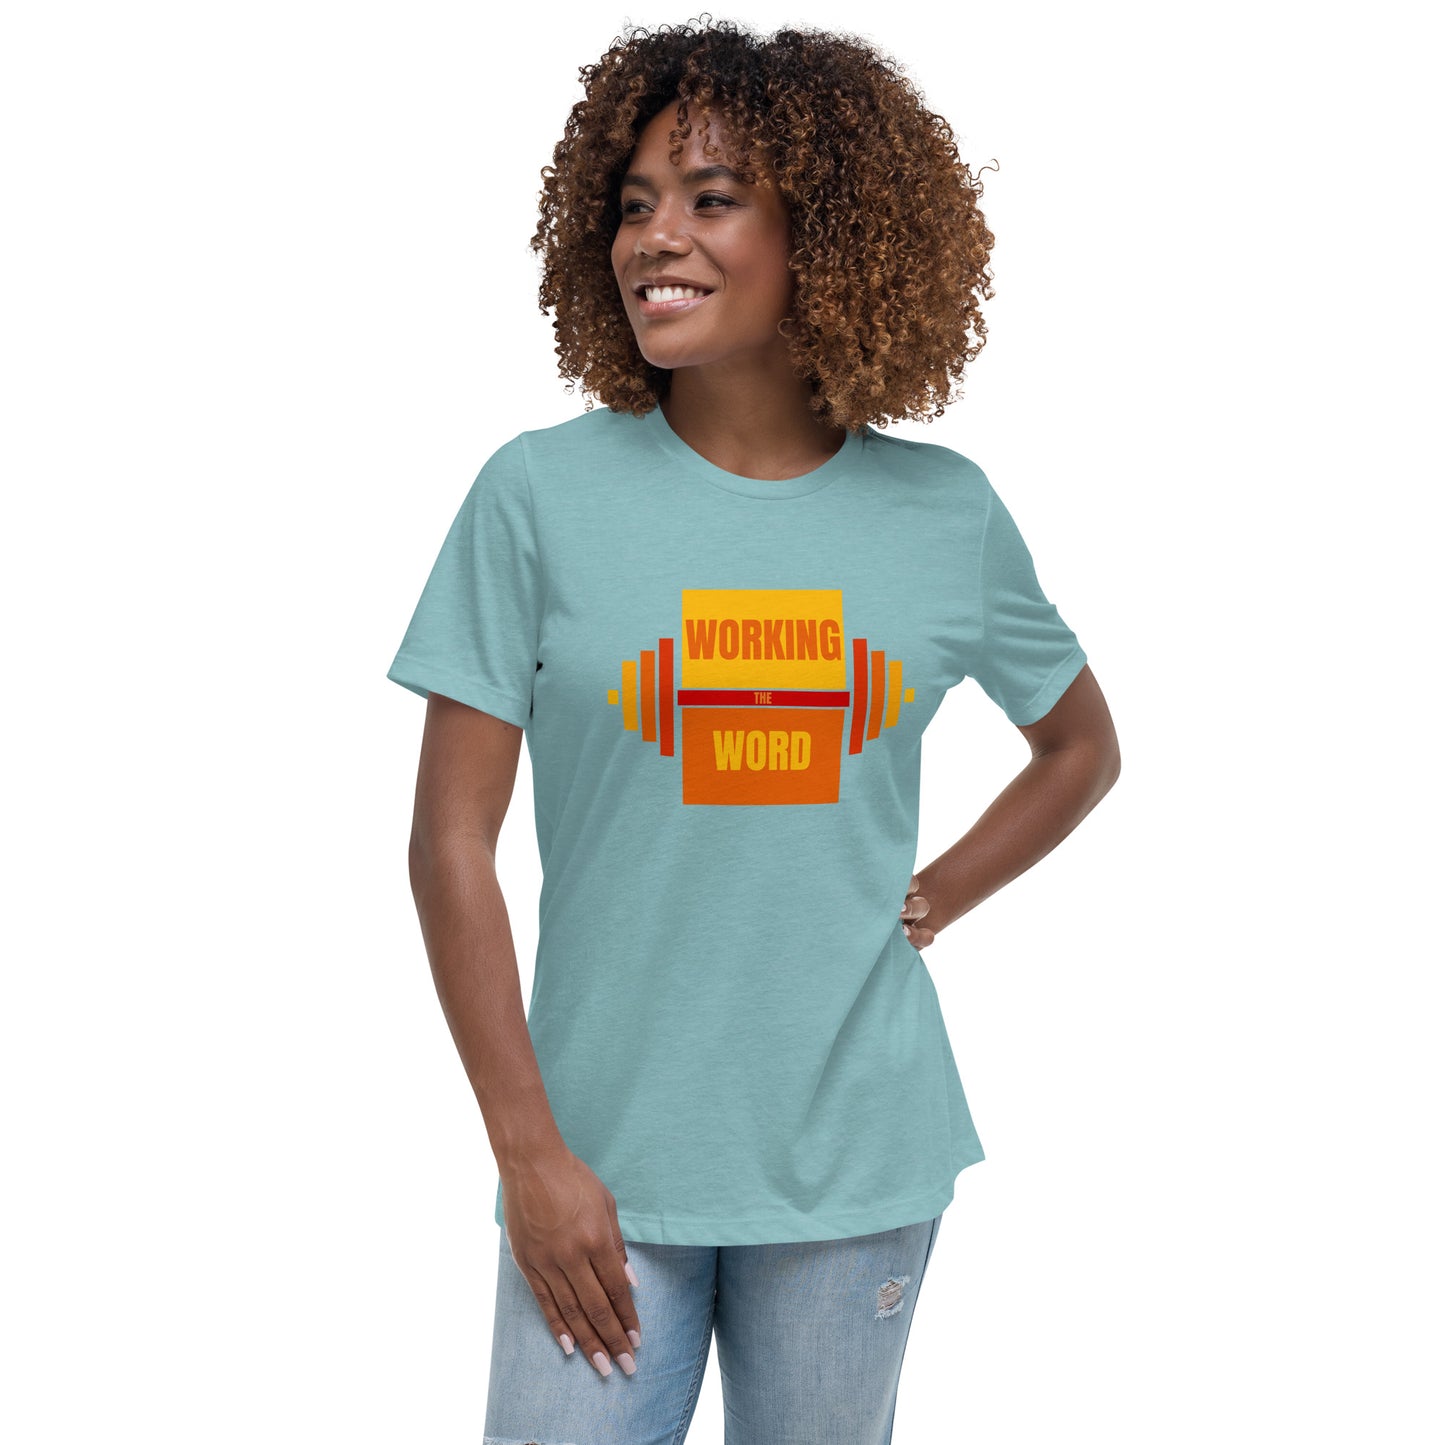 Working the Word Women's Relaxed T-Shirt